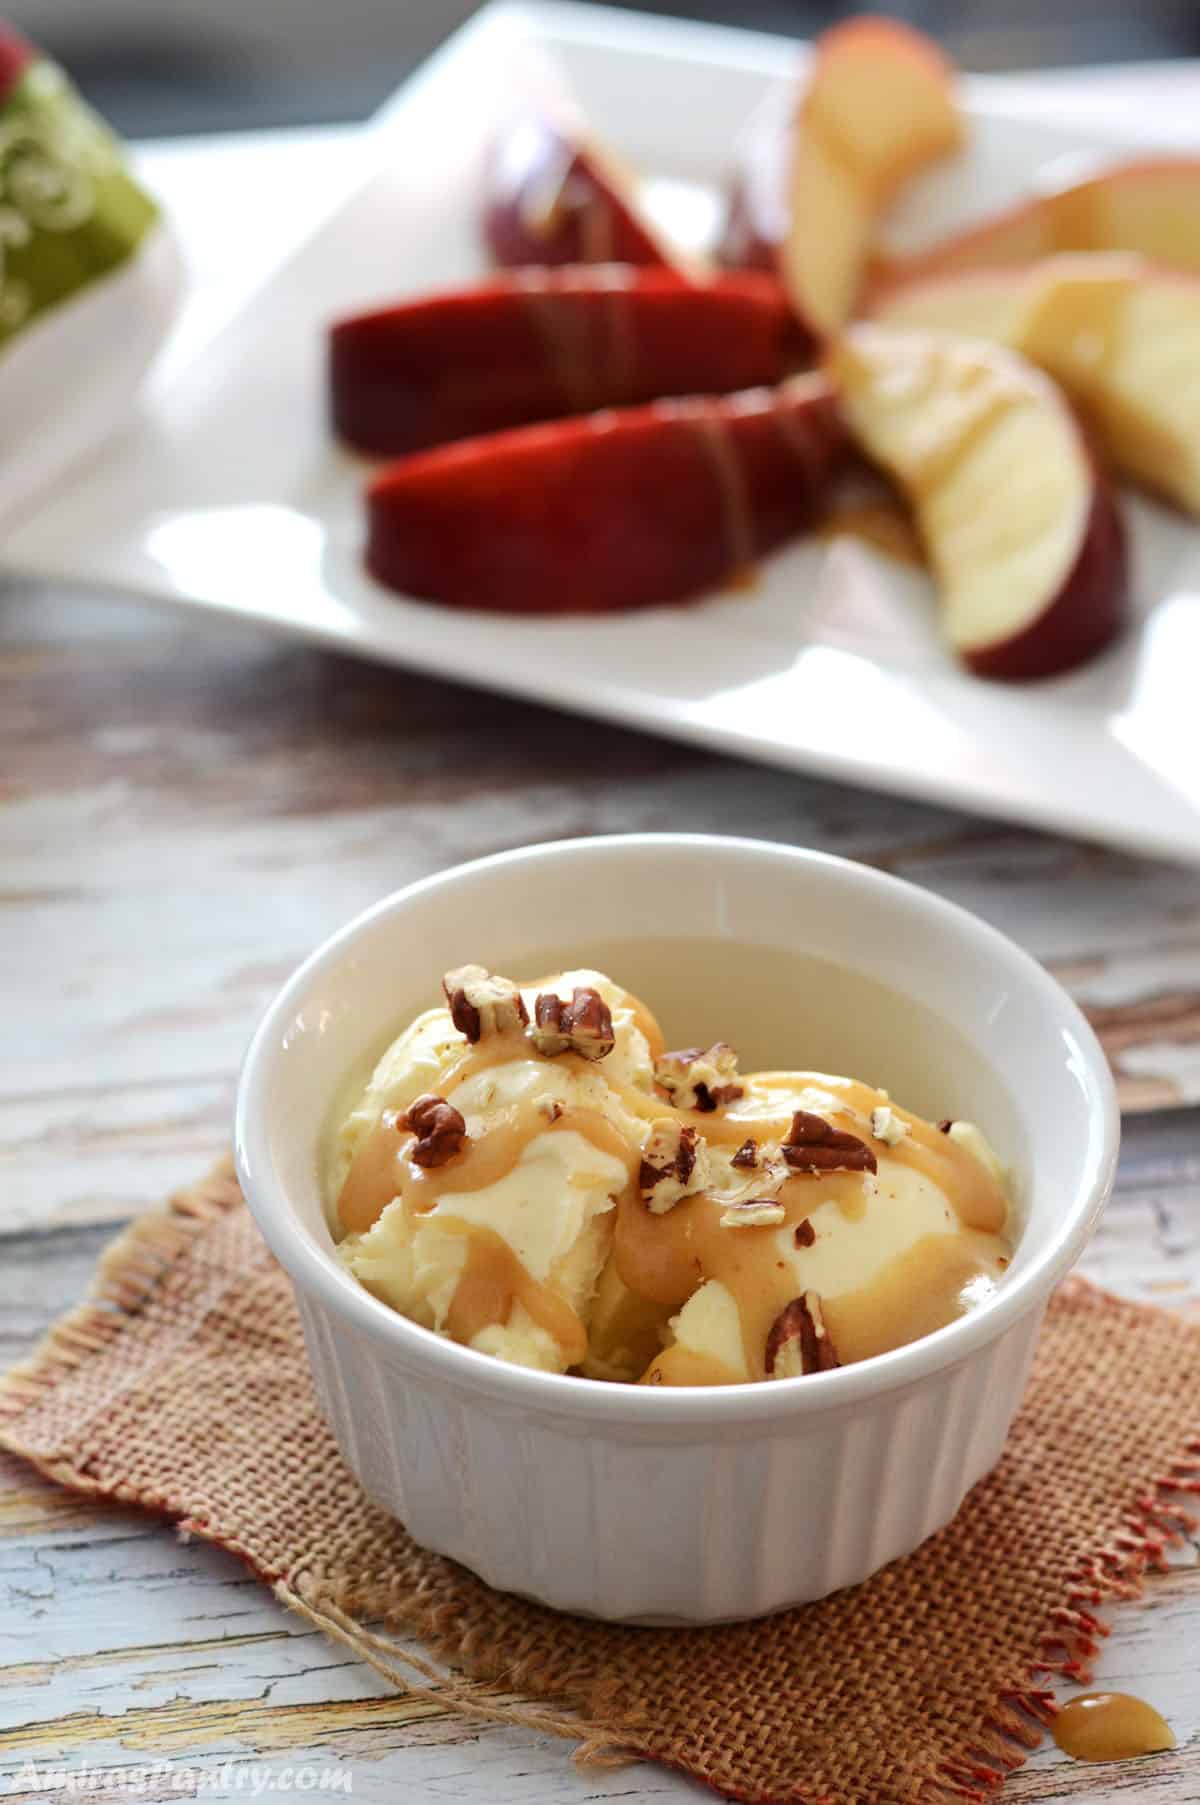 A small white ramekin with ice cream drizzled with date caramel and pecan pieces.